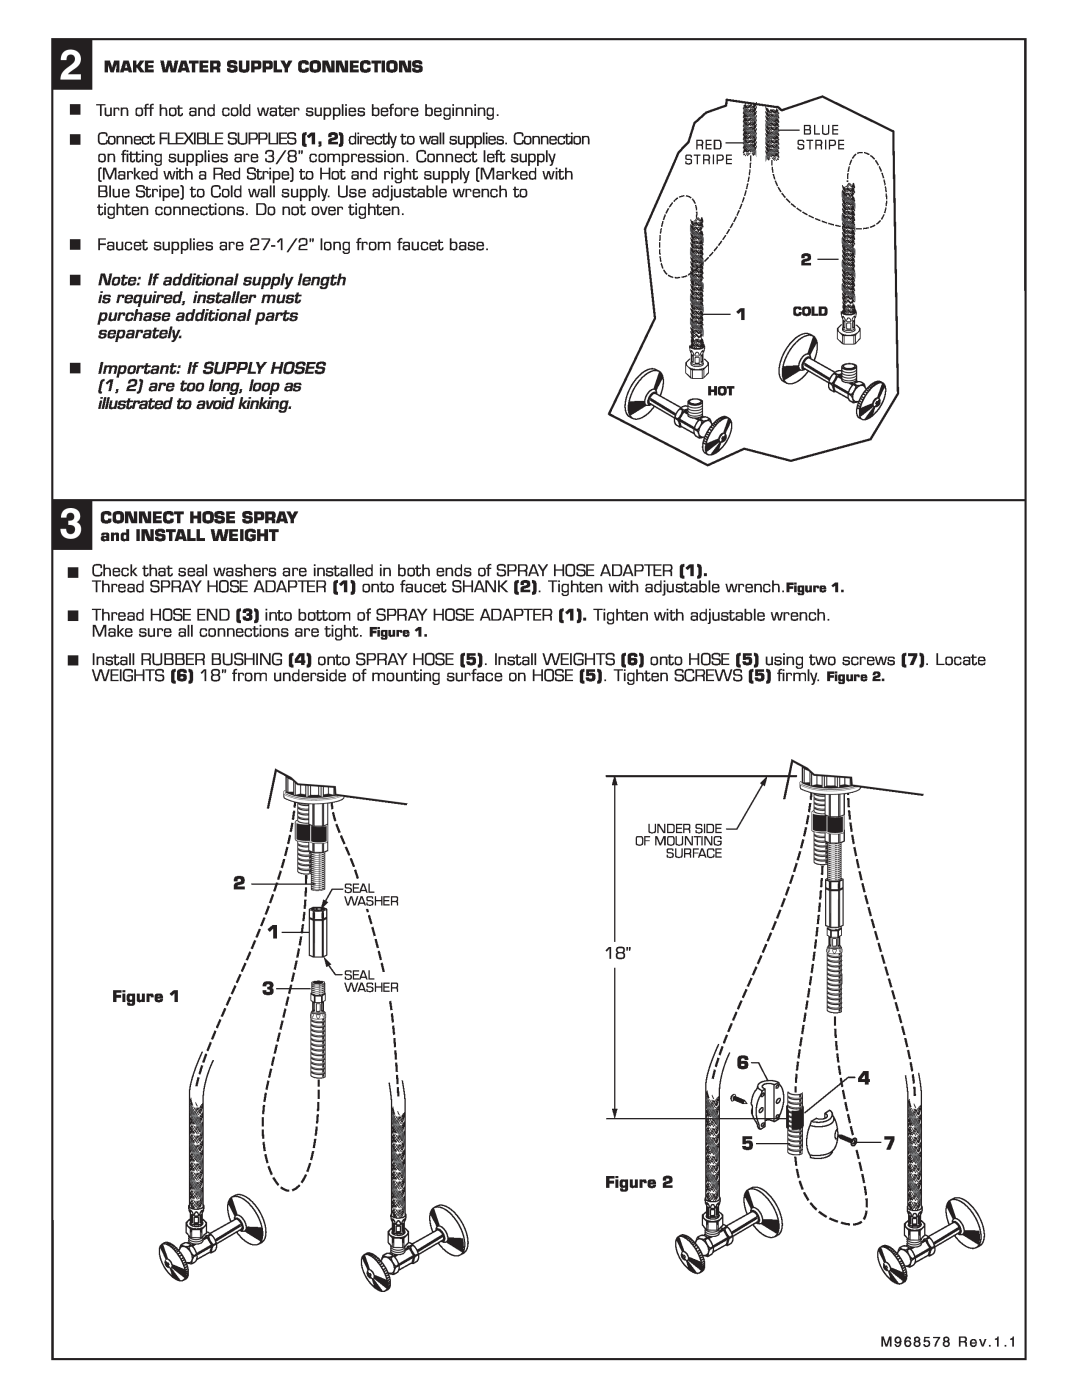 American Standard 4332.100.XXX Make Water Supply Connections, CONNECT HOSE SPRAY and INSTALL WEIGHT 